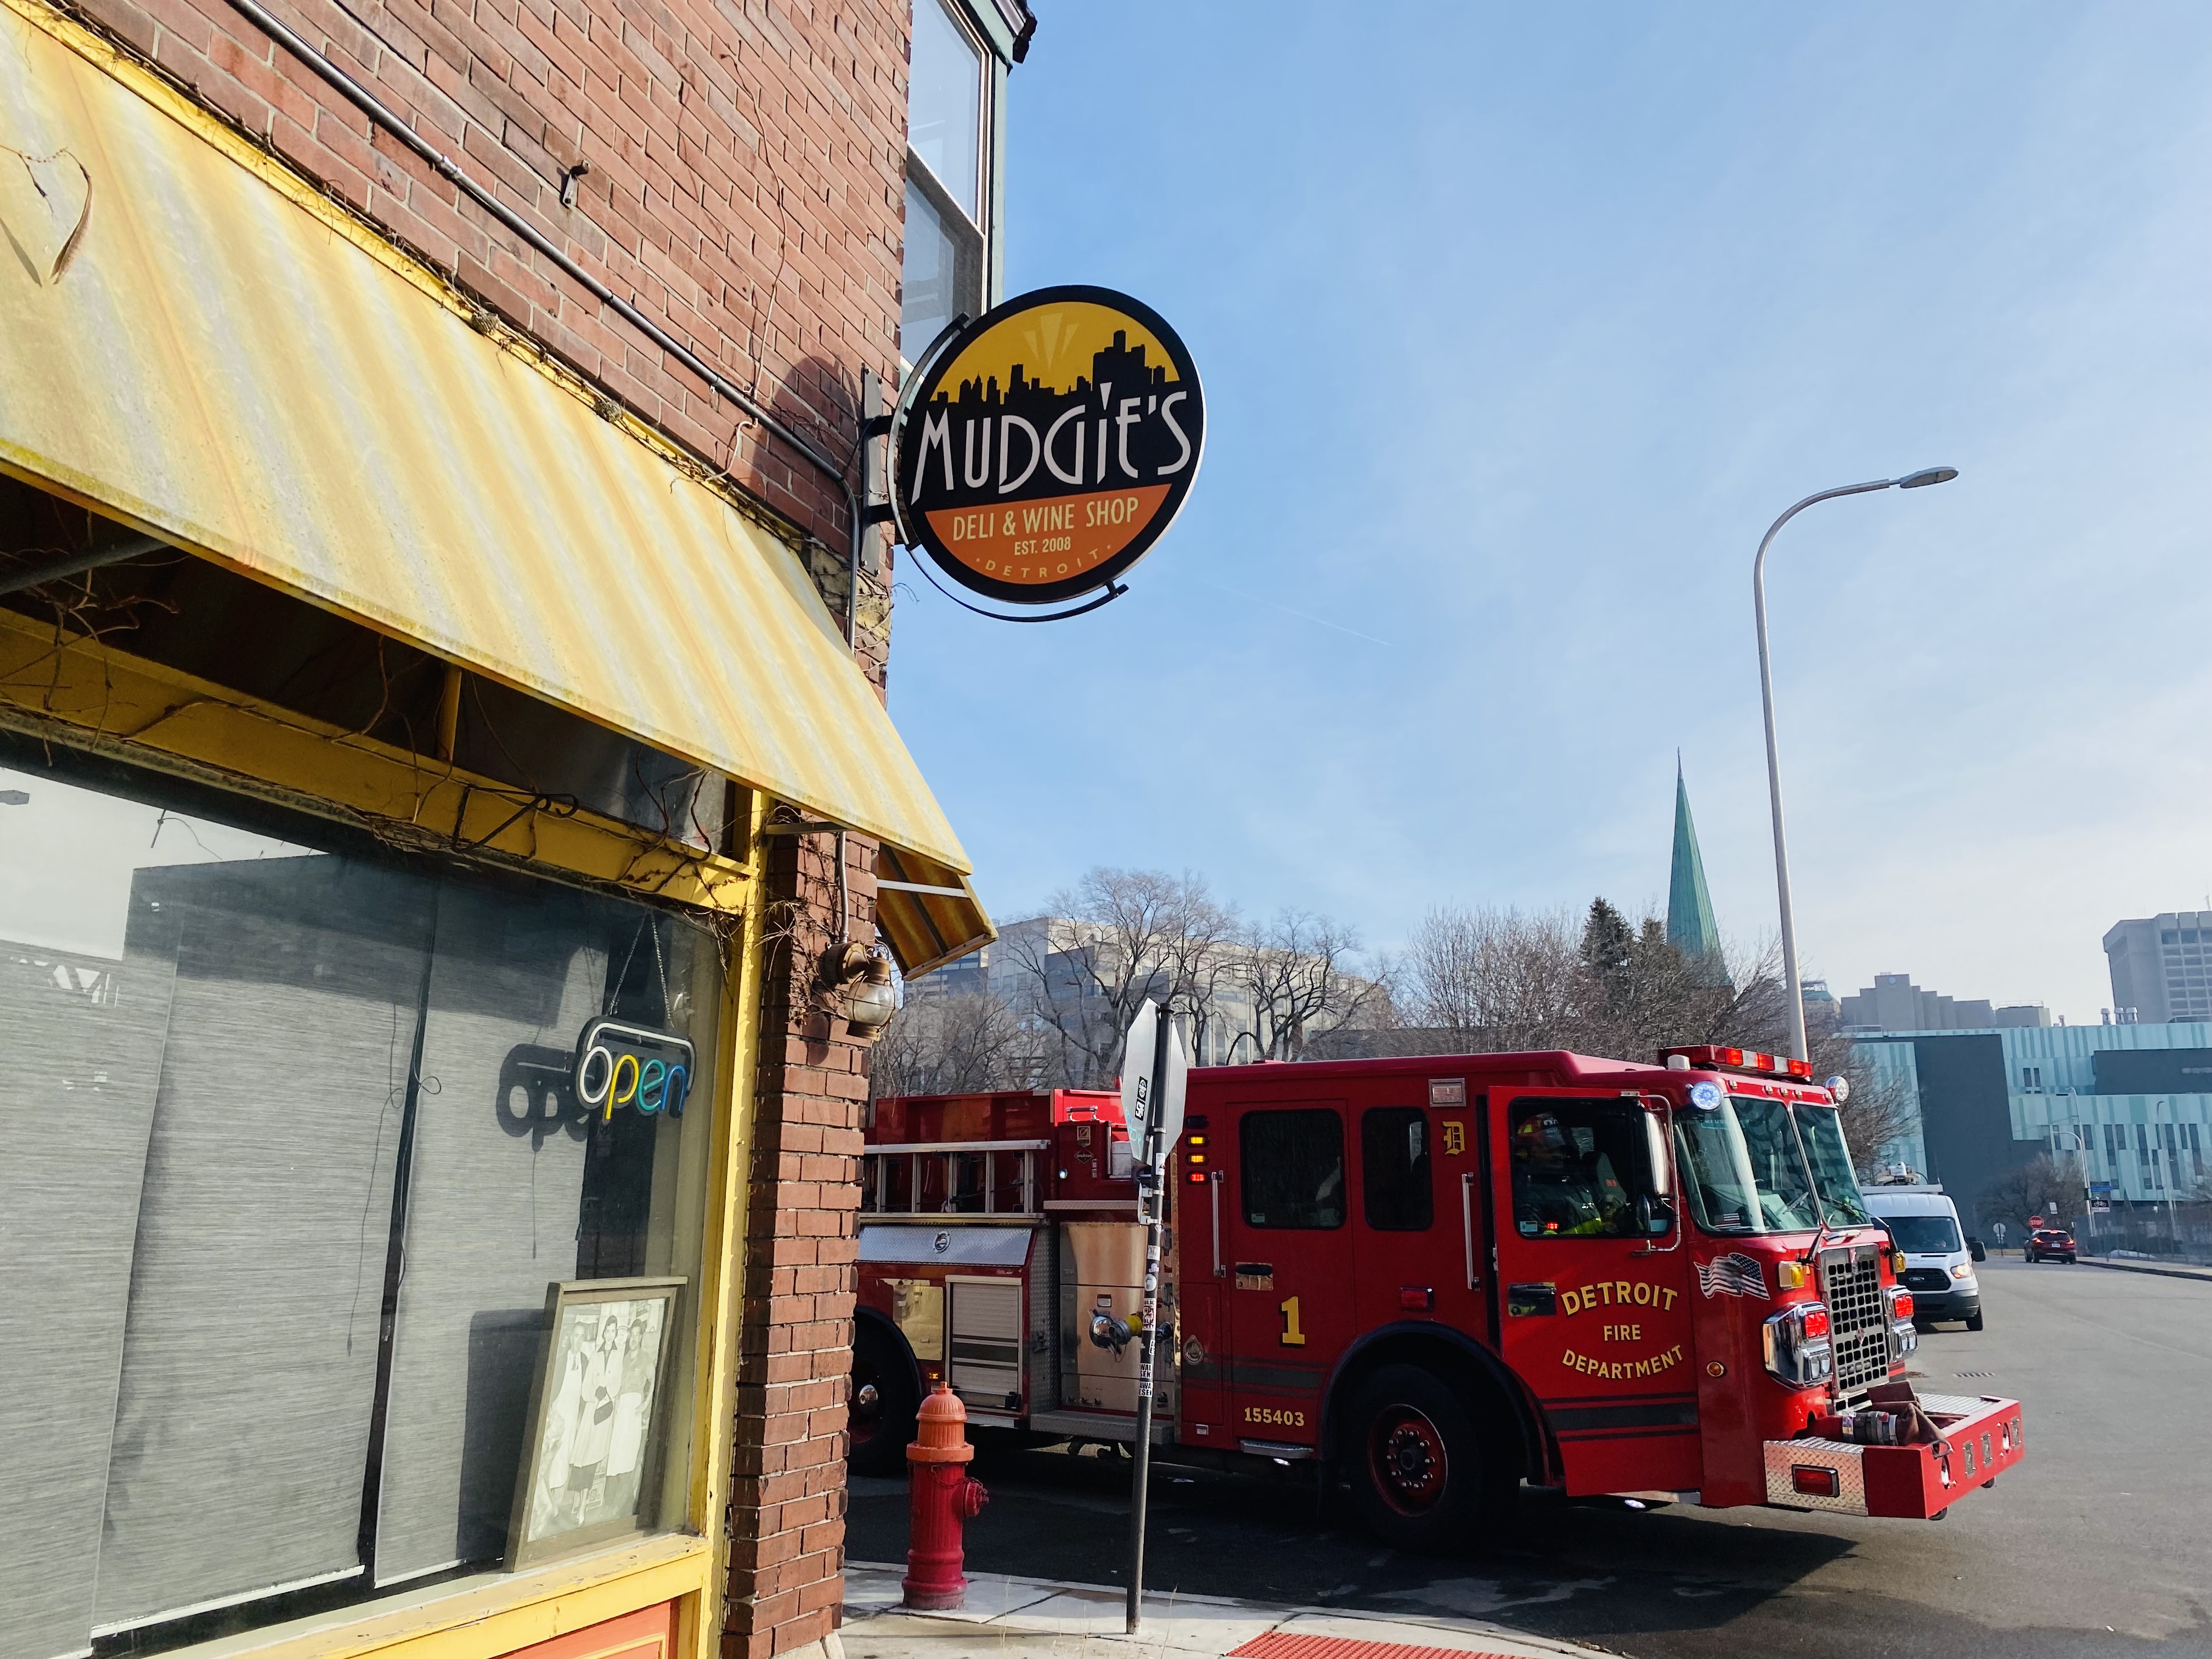 A red fire truck parked next to a stop sign at the corner of Porter and Brooklyn in Detroit. Yellow and white awning and sign that says Mudgie’s also pictured.